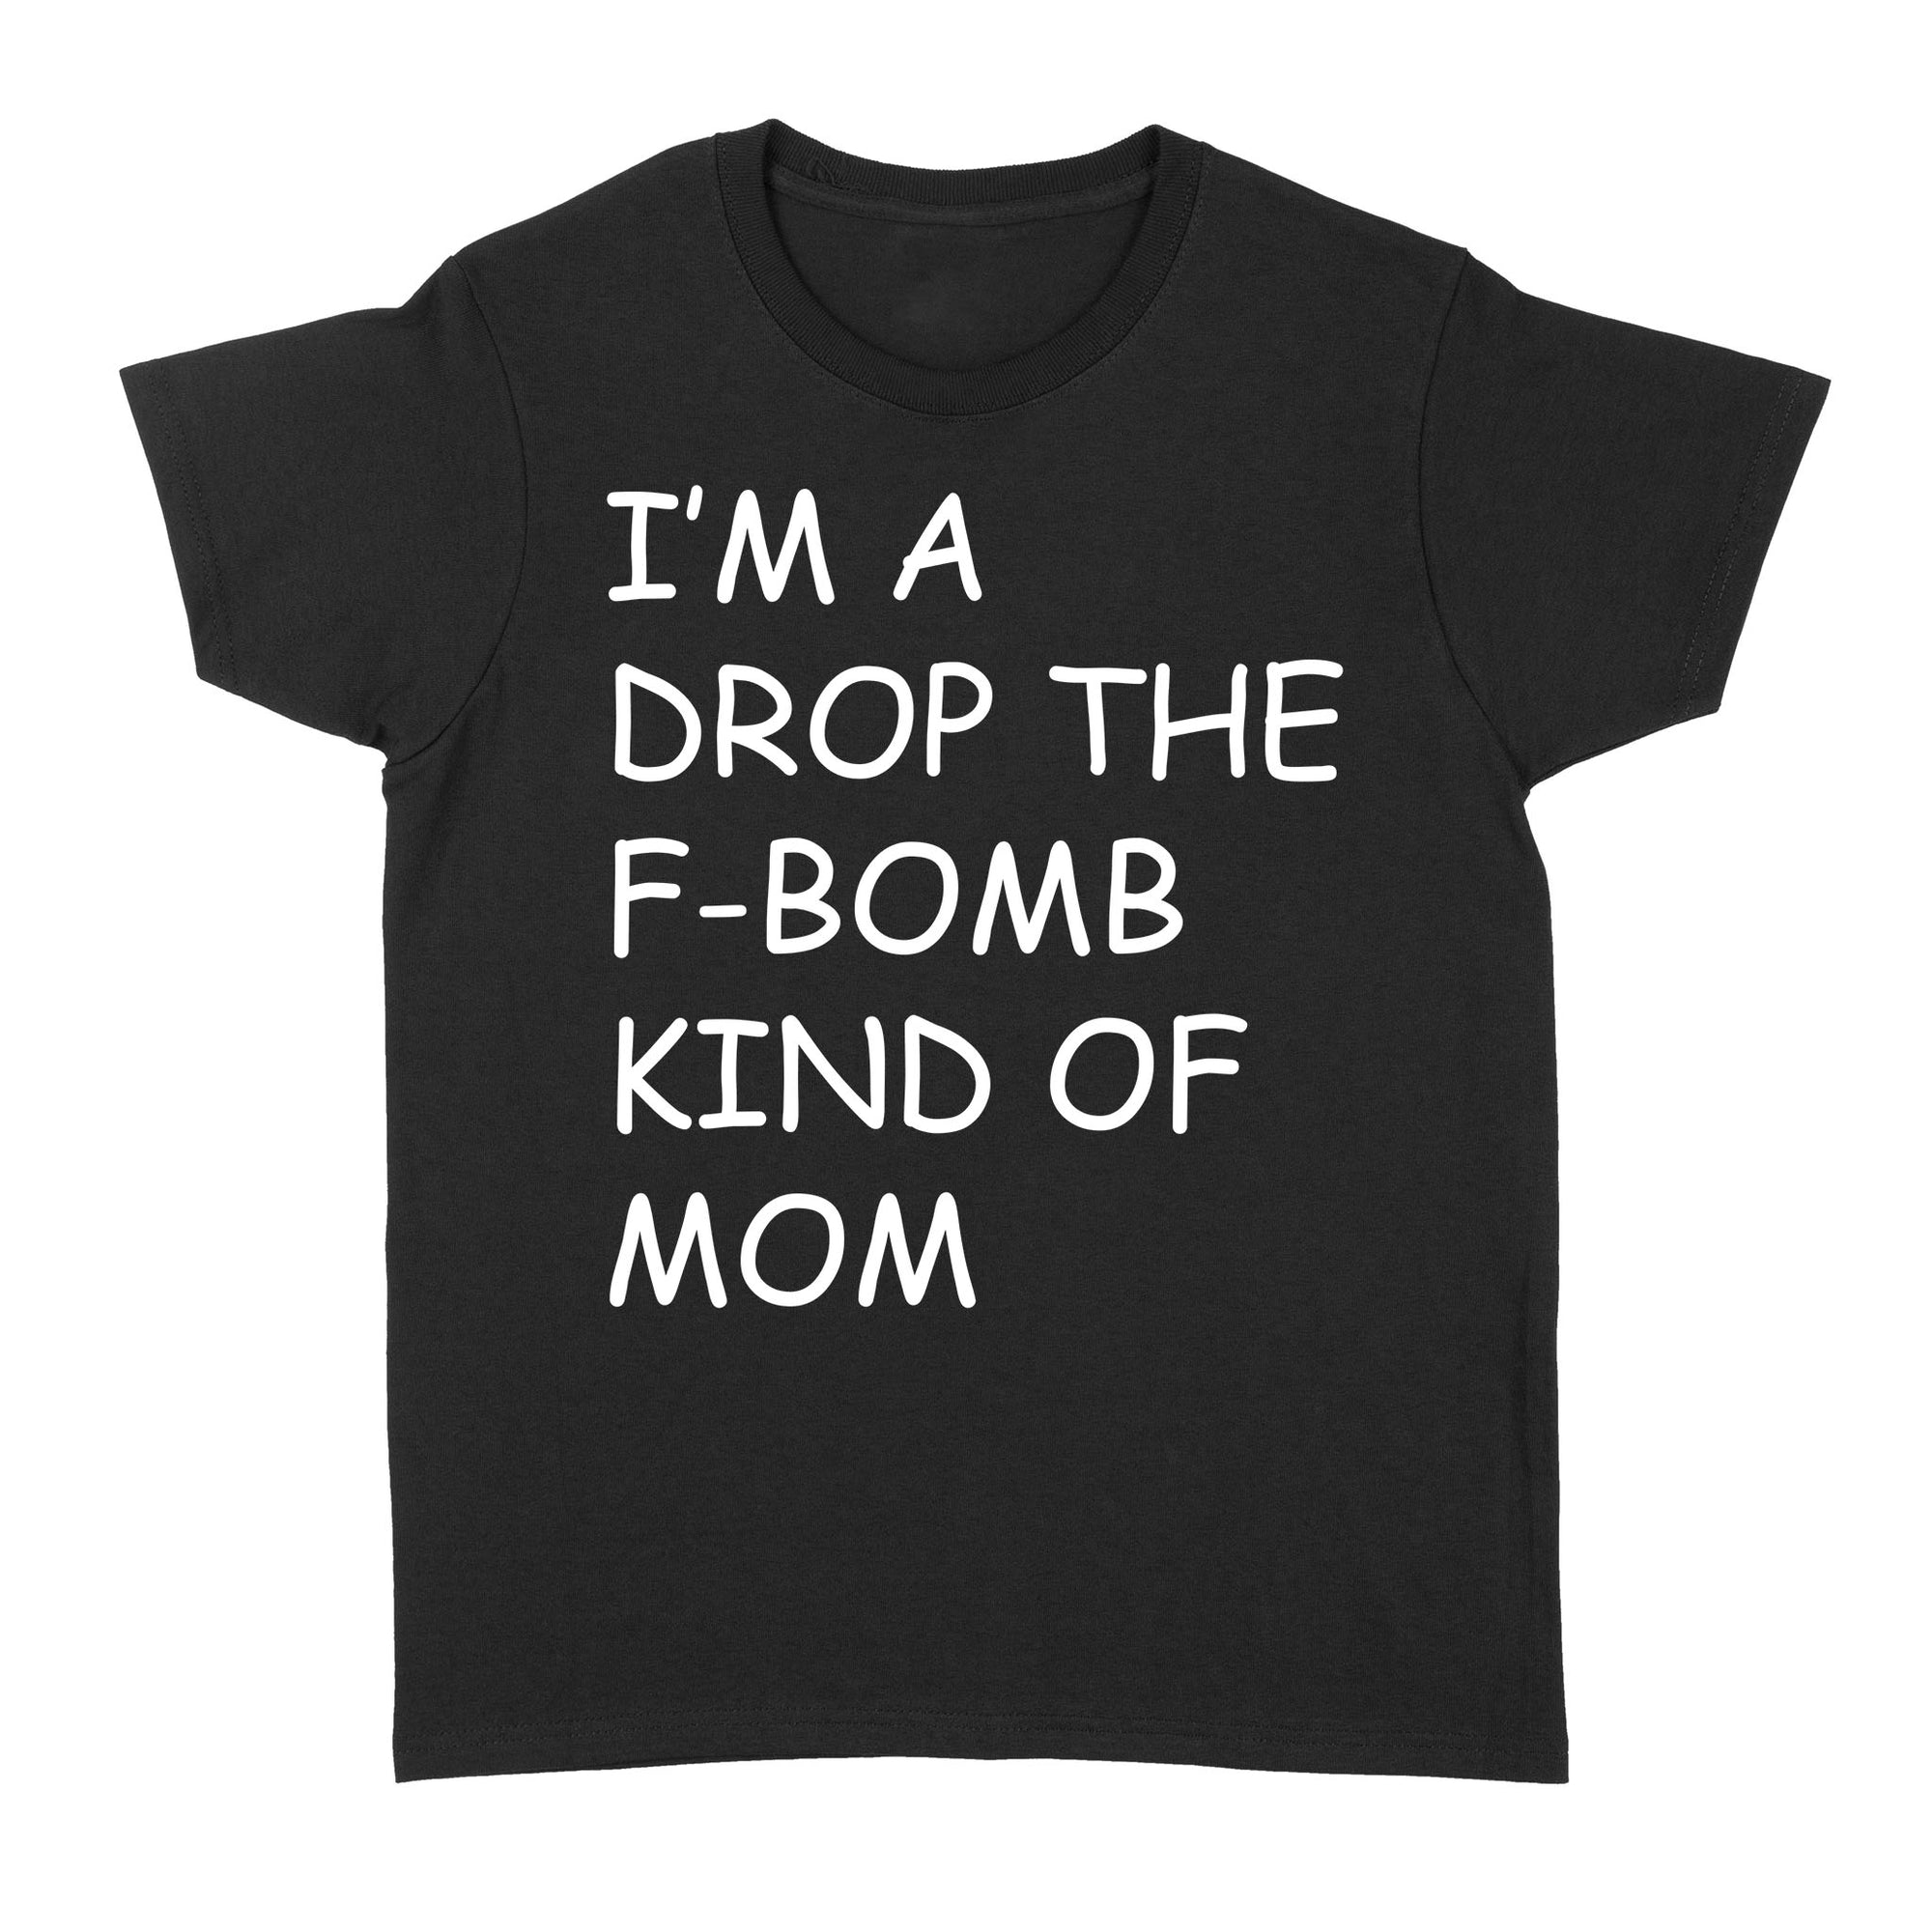 I'm A Drop The F-Bomb Kind Of Mom Funny Gift Ideas for Mom Mother Mothers Day Wife - Standard Women's T-shirt